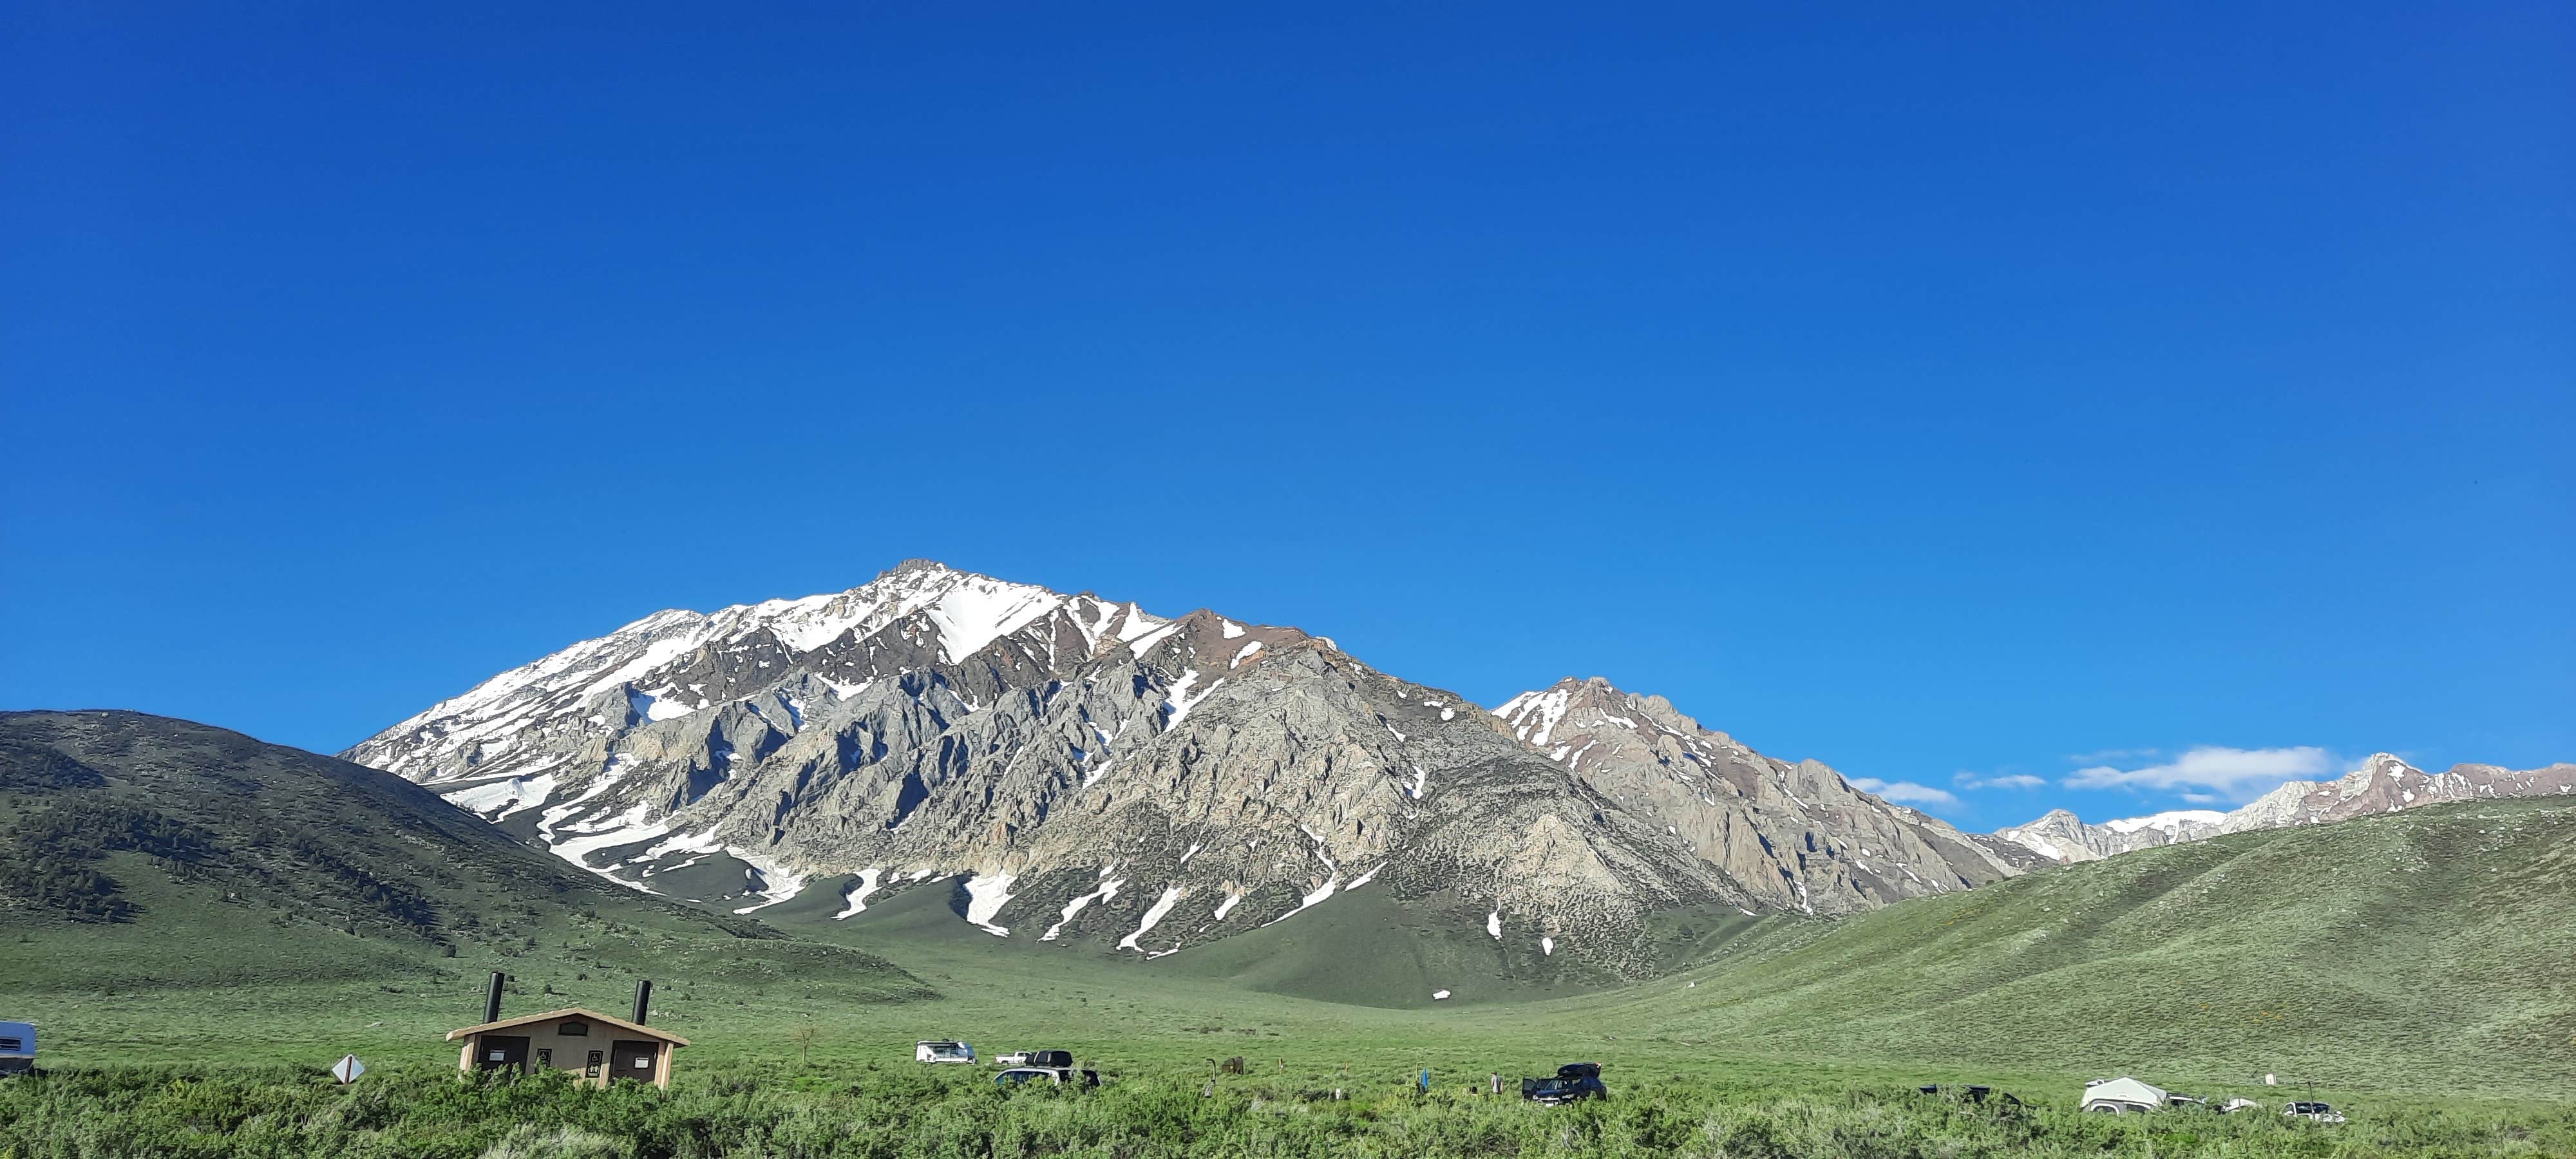 Camper submitted image from Crowley Lake Campground - 5